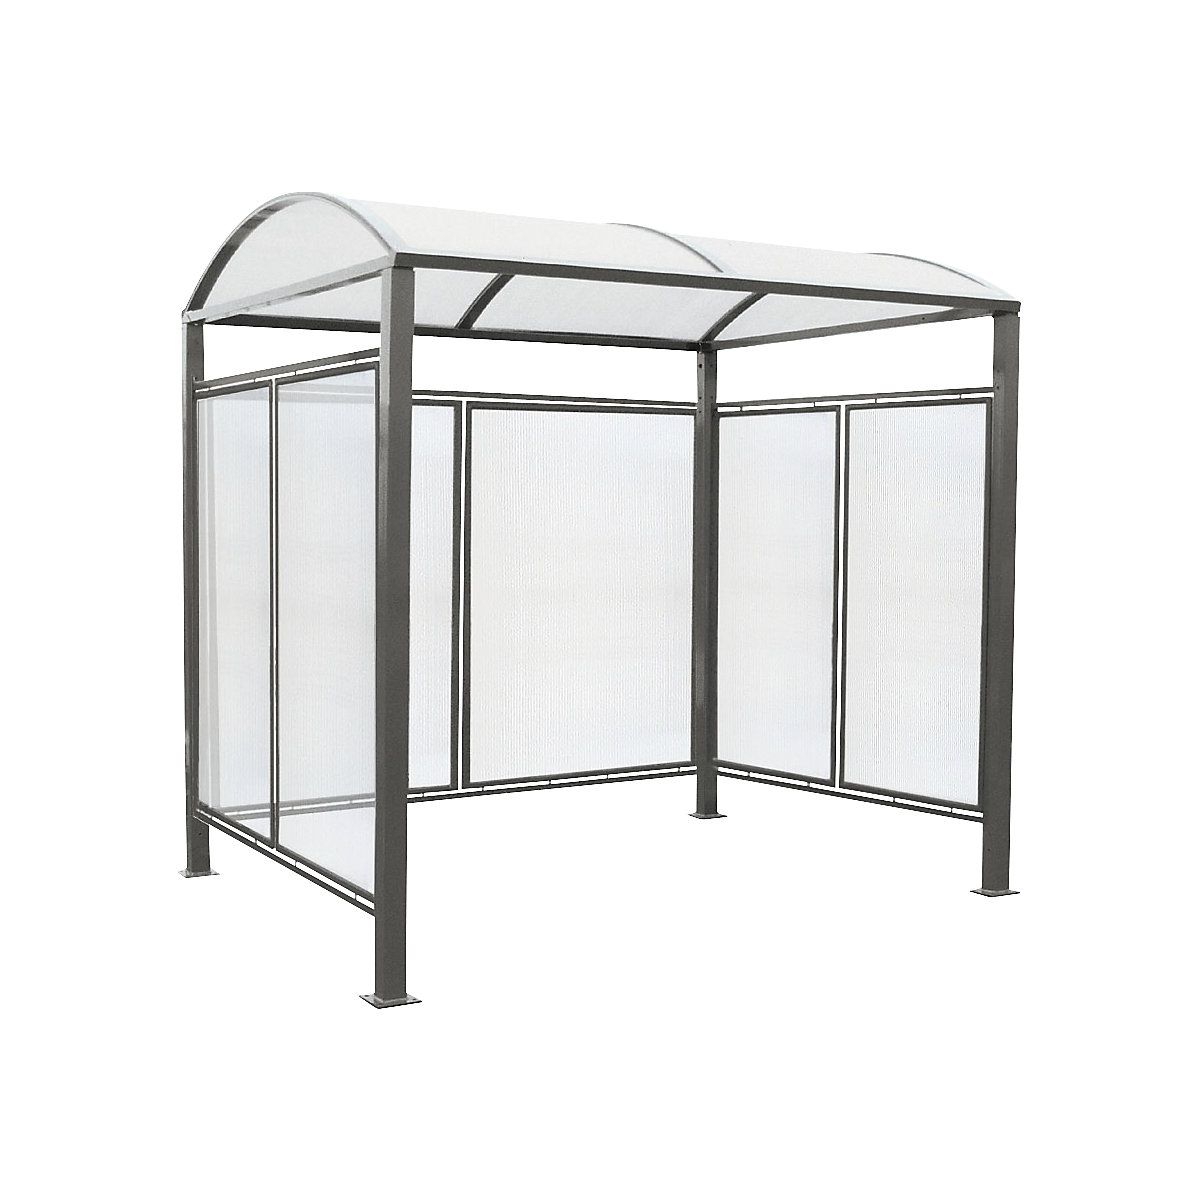 Shelter for bicycles, bus stops, entrances – PROCITY, standard model with rear cladding/side panels, charcoal-2